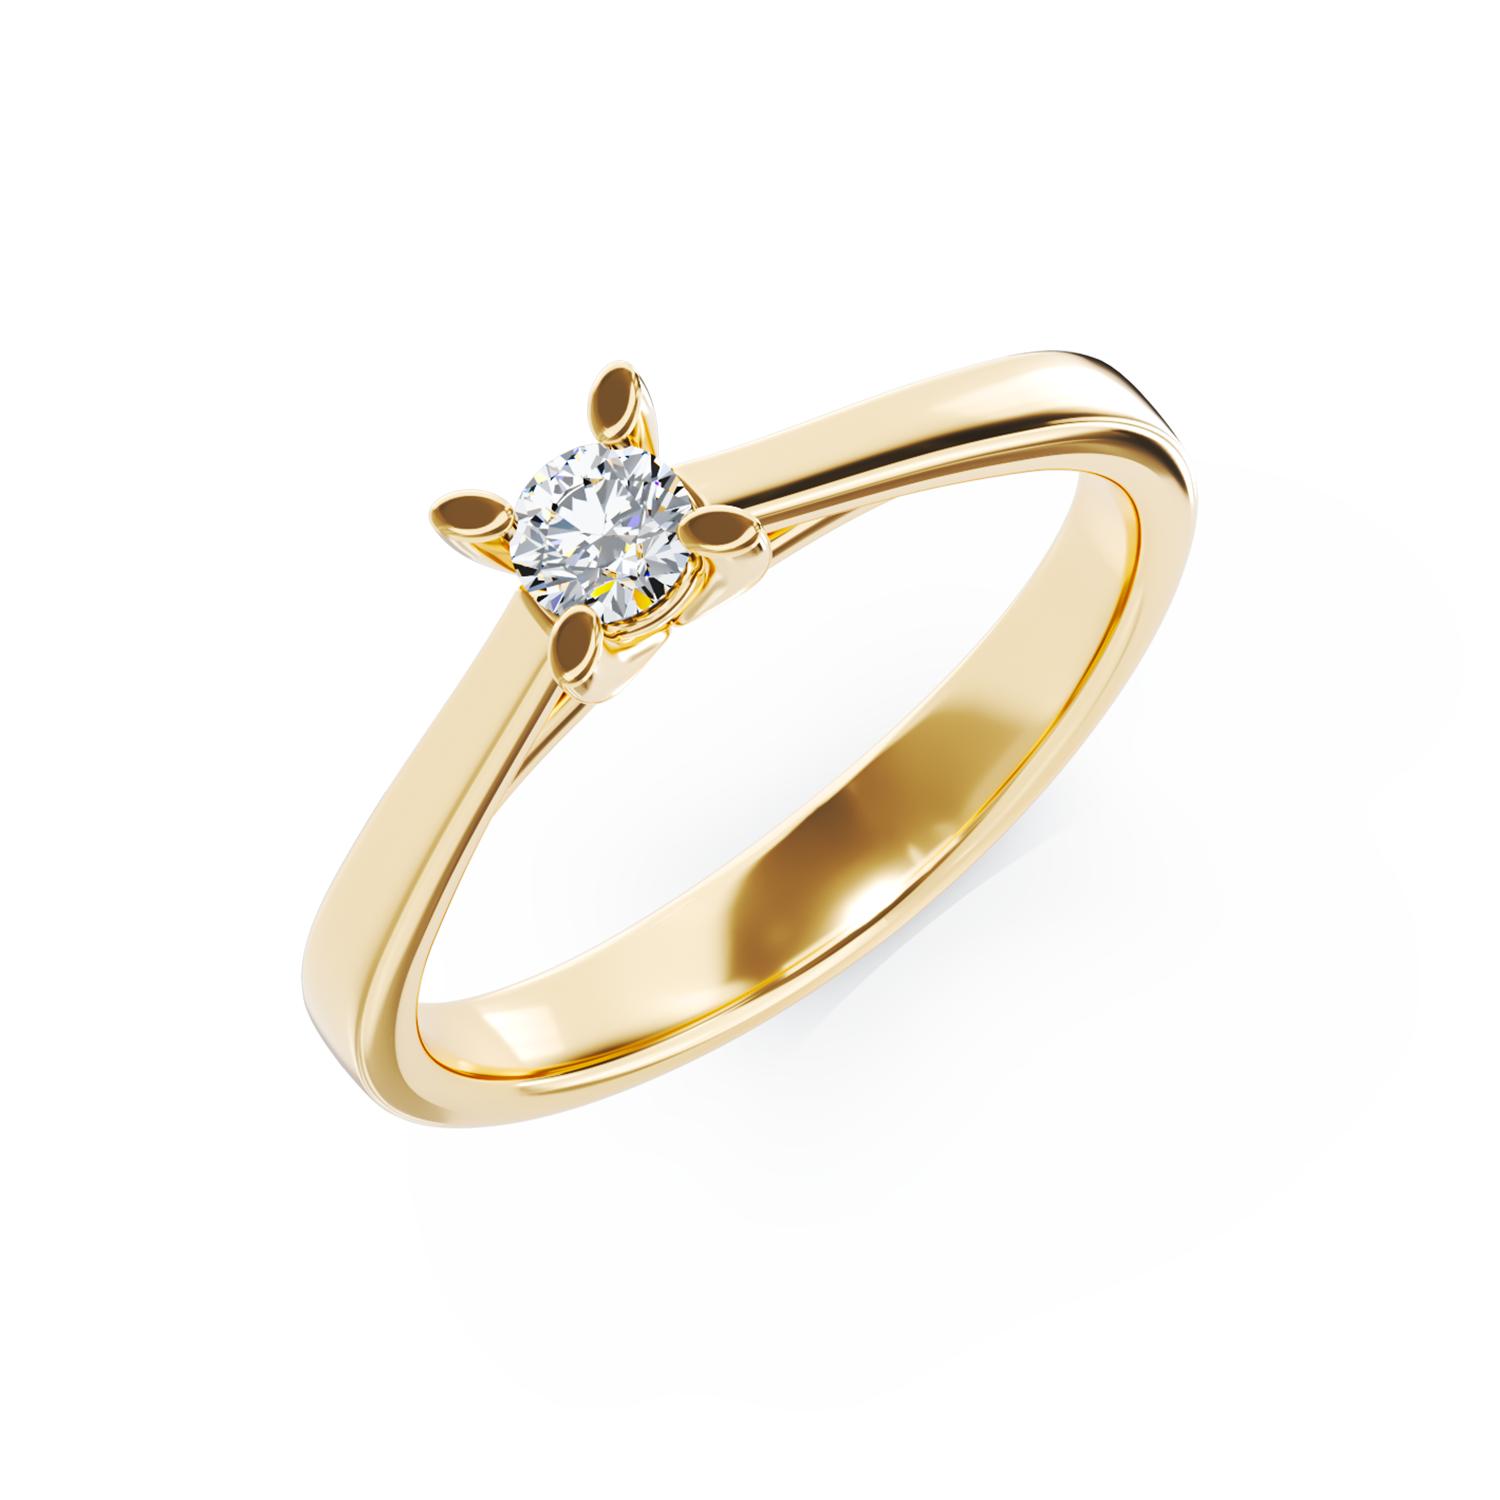 18K yellow gold engagement ring with a 0.1ct solitaire diamond